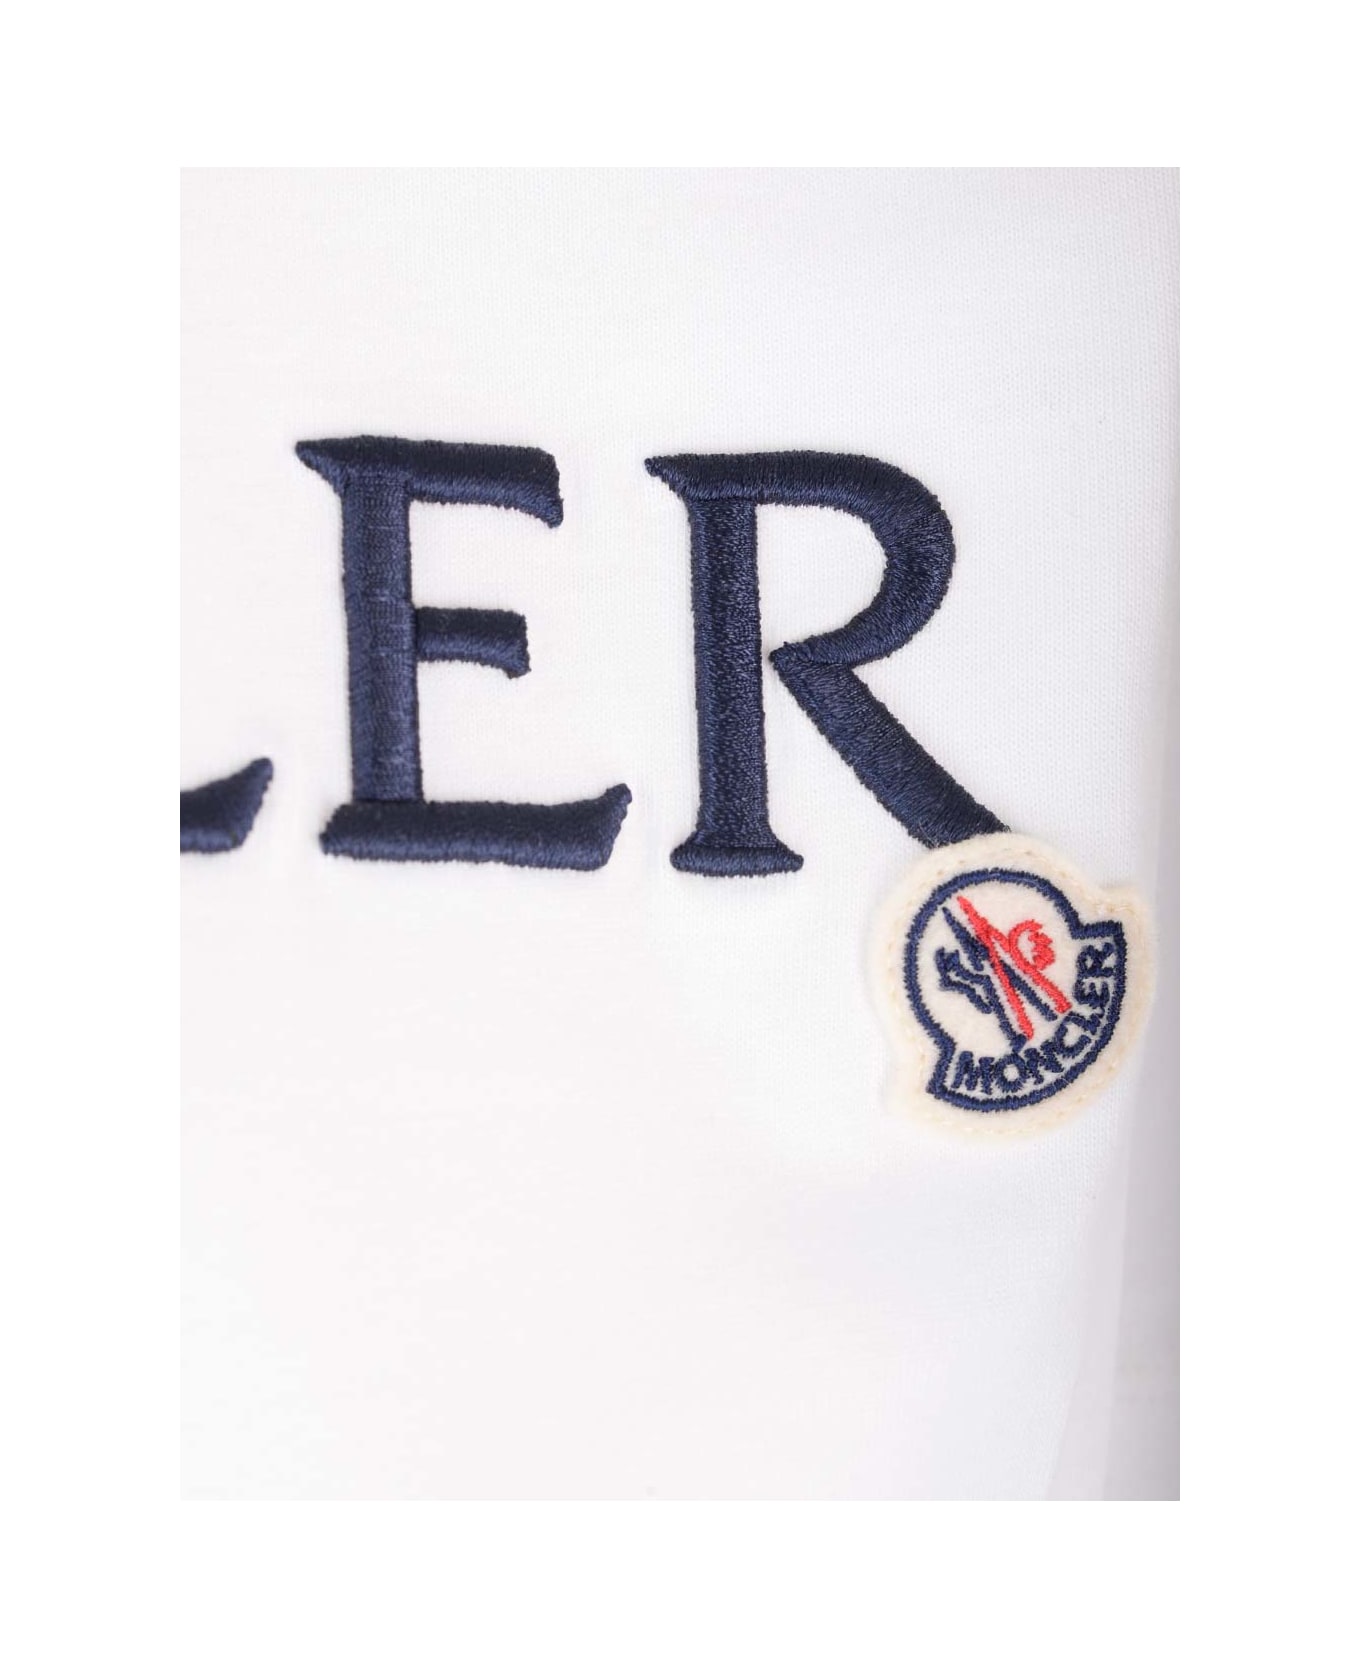 Moncler Embroidered T-shirt - White